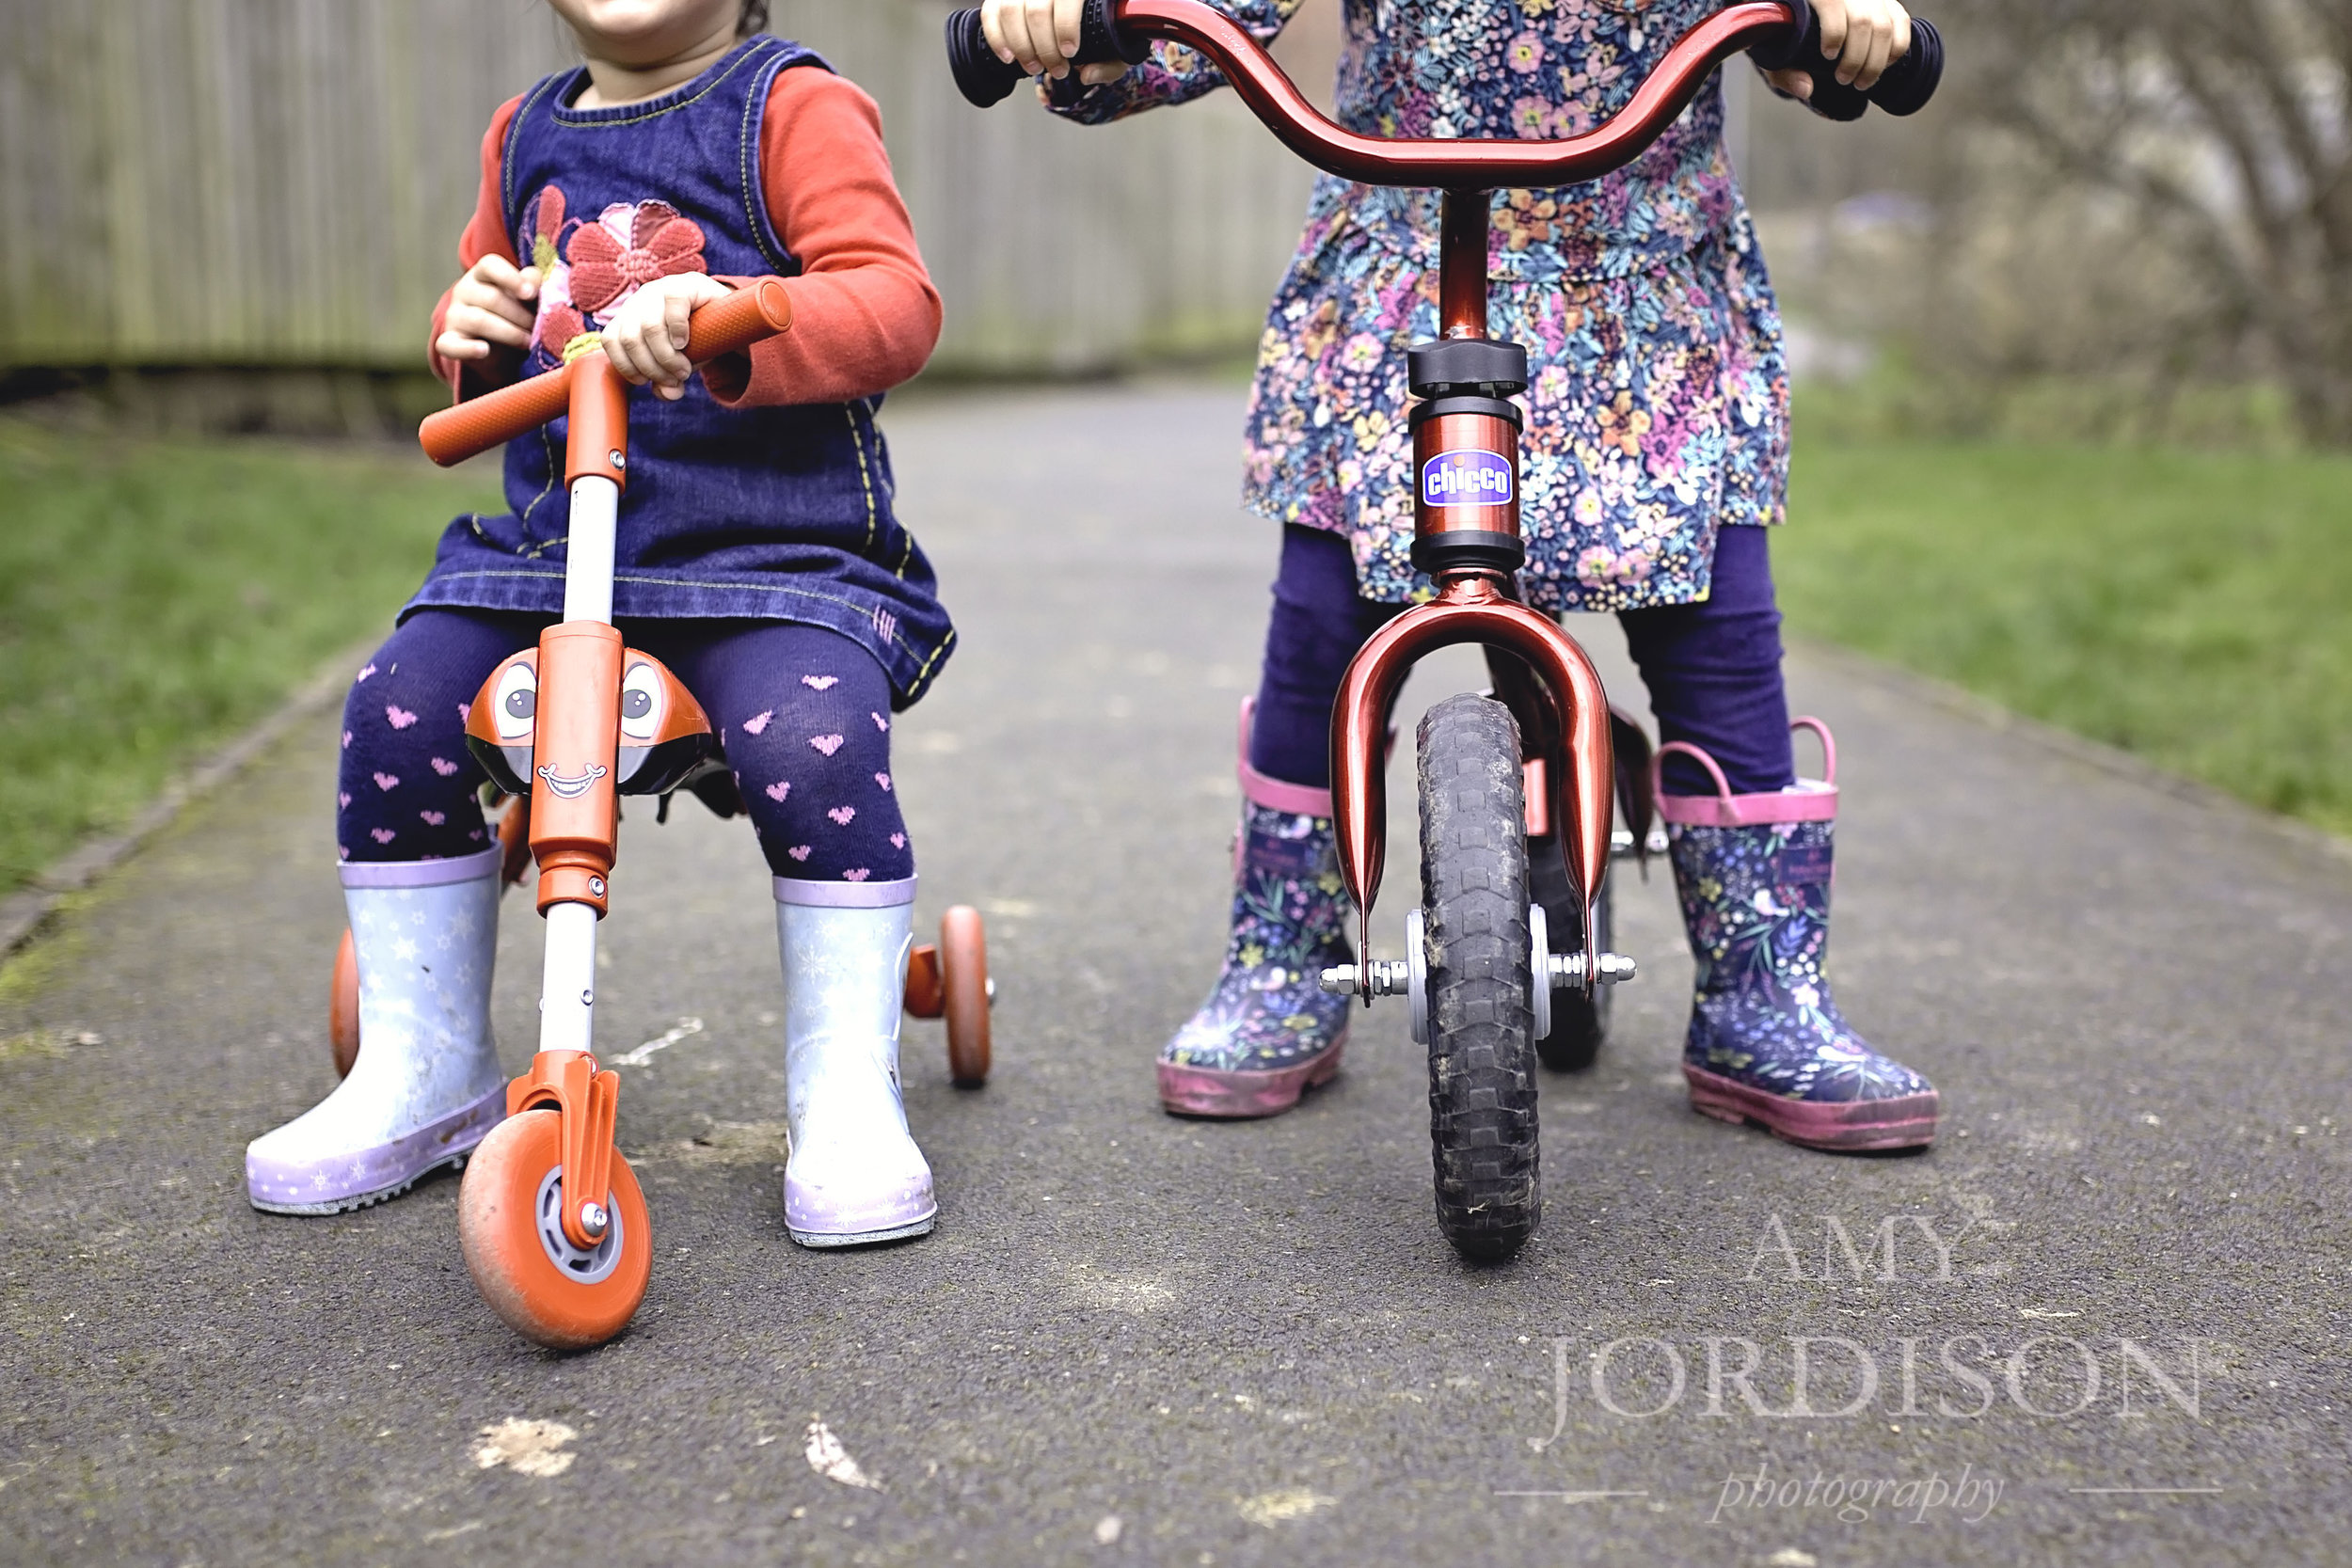 Family Photoshoot at Home in Yorkshire: Amy Jordison Photography